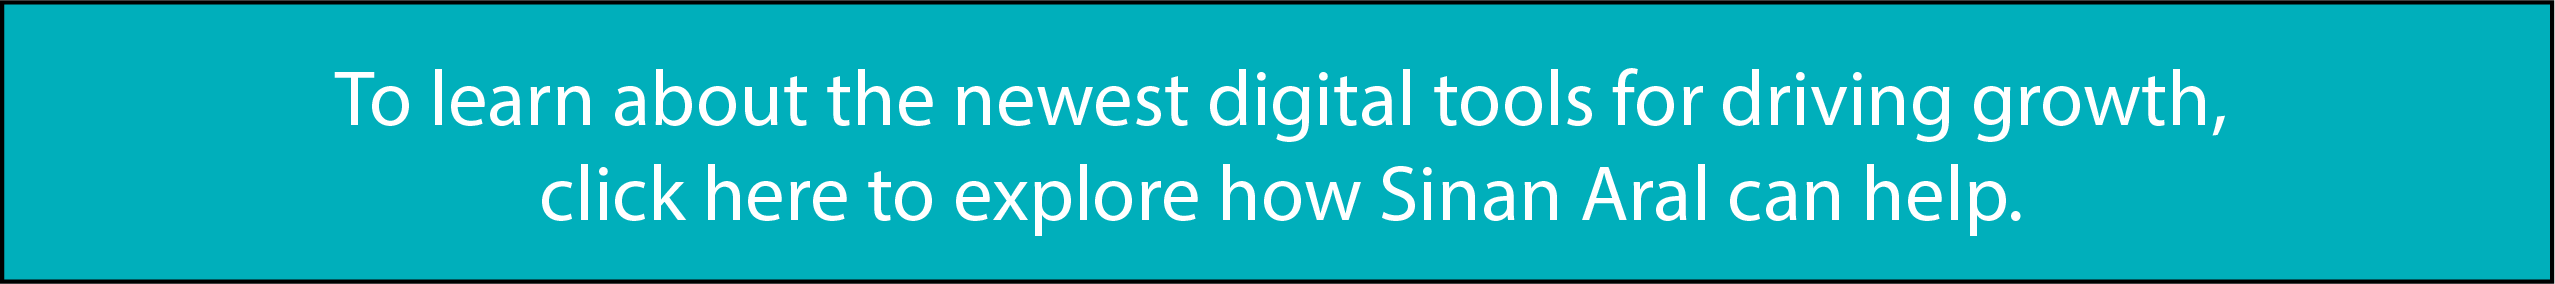 To learn about the newest digital tools for driving growth, click here to explore how Sinan Aral can help.